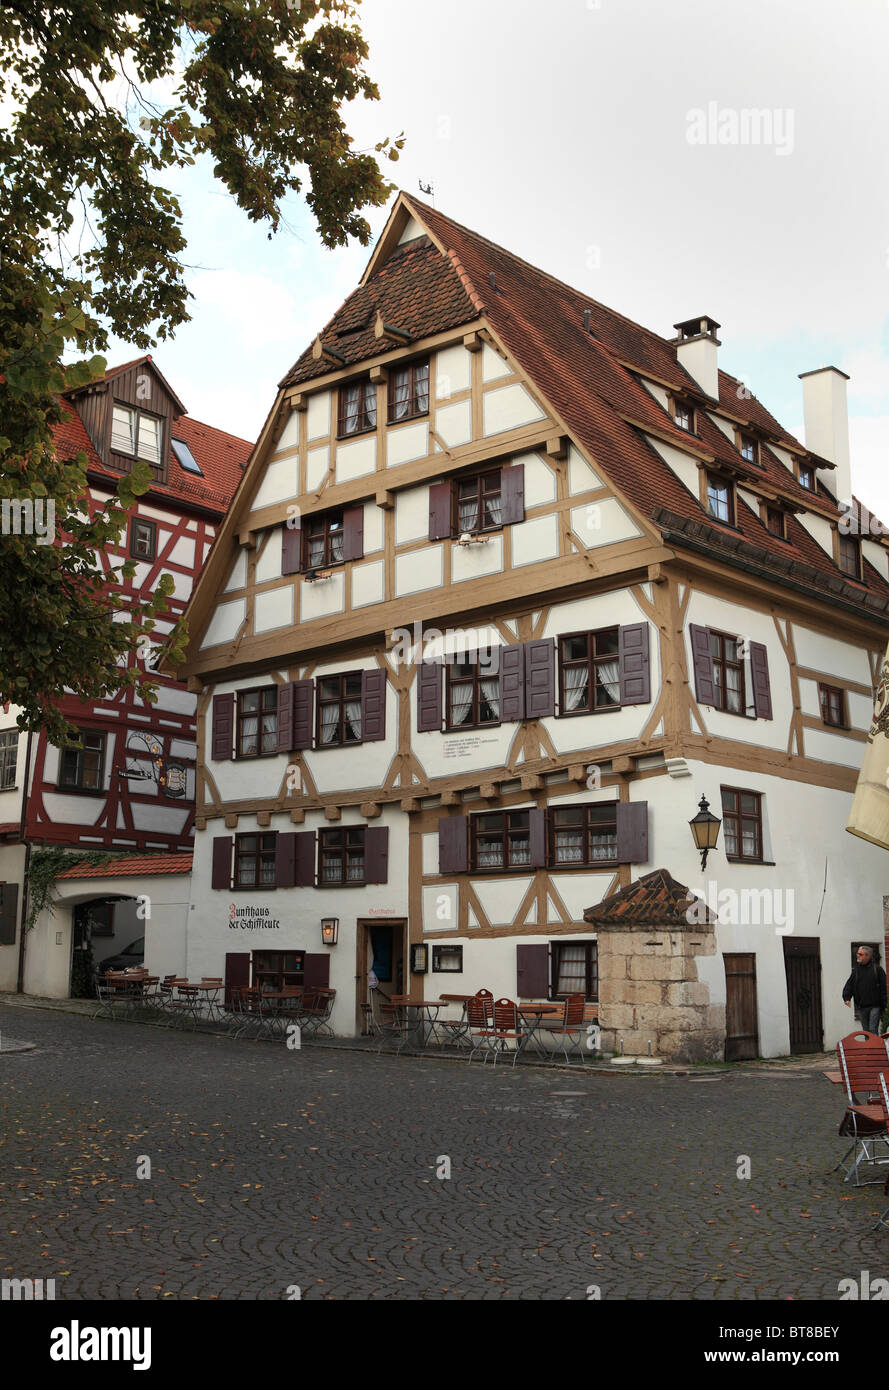 Restaurant 'Zunfthaus der Schiffleute', tradional building dating back to the 15th.century in Ulm,Germany Stock Photo